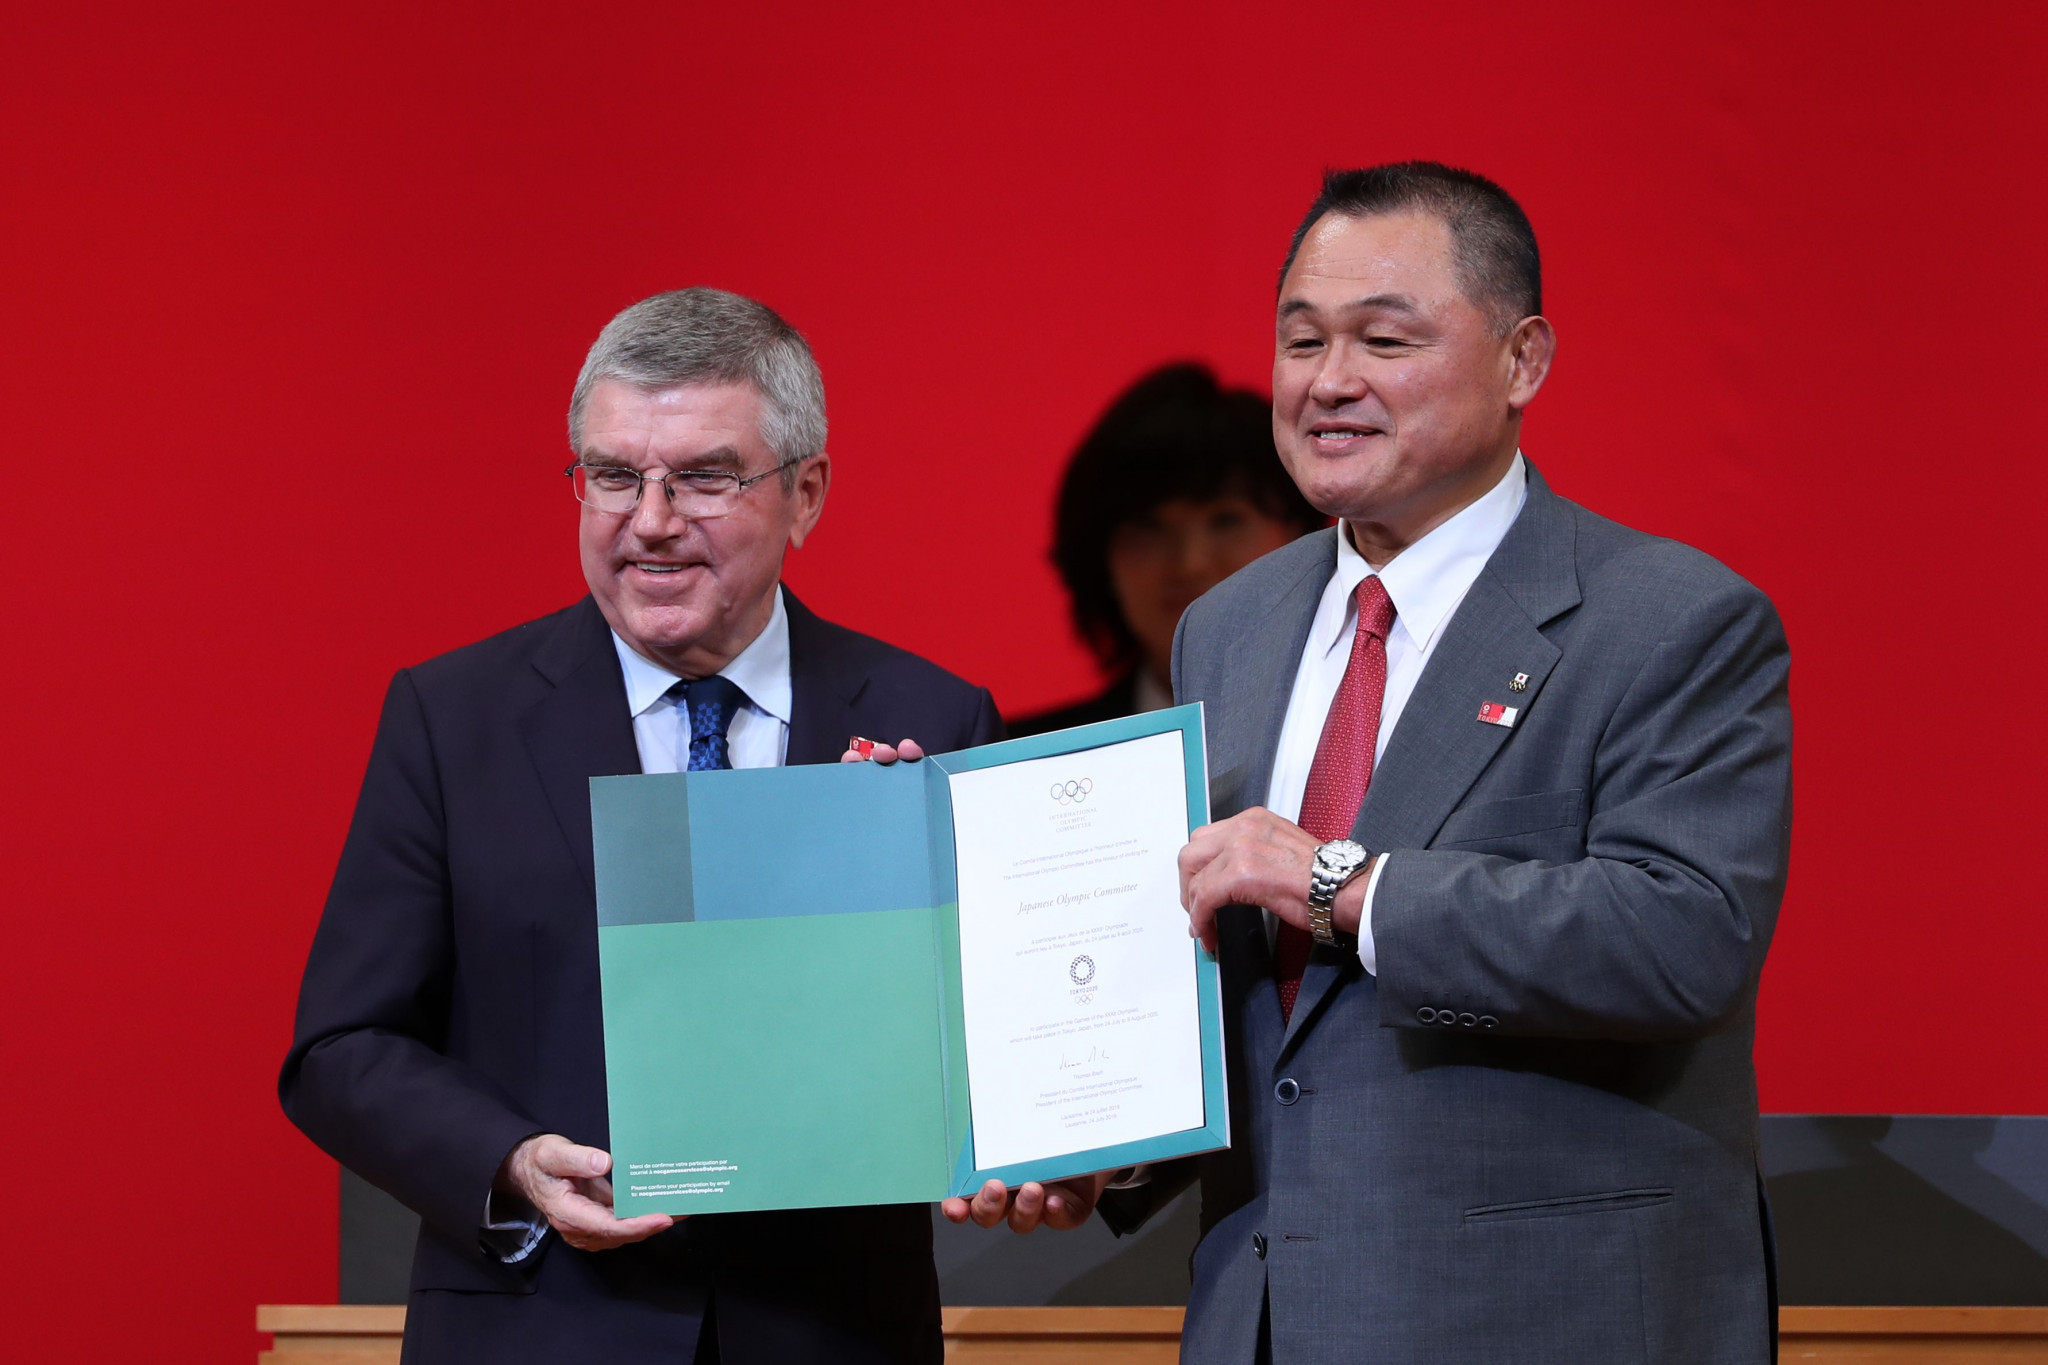 IOC and JOC Presidents discuss methods to stop abuse in Japanese sport